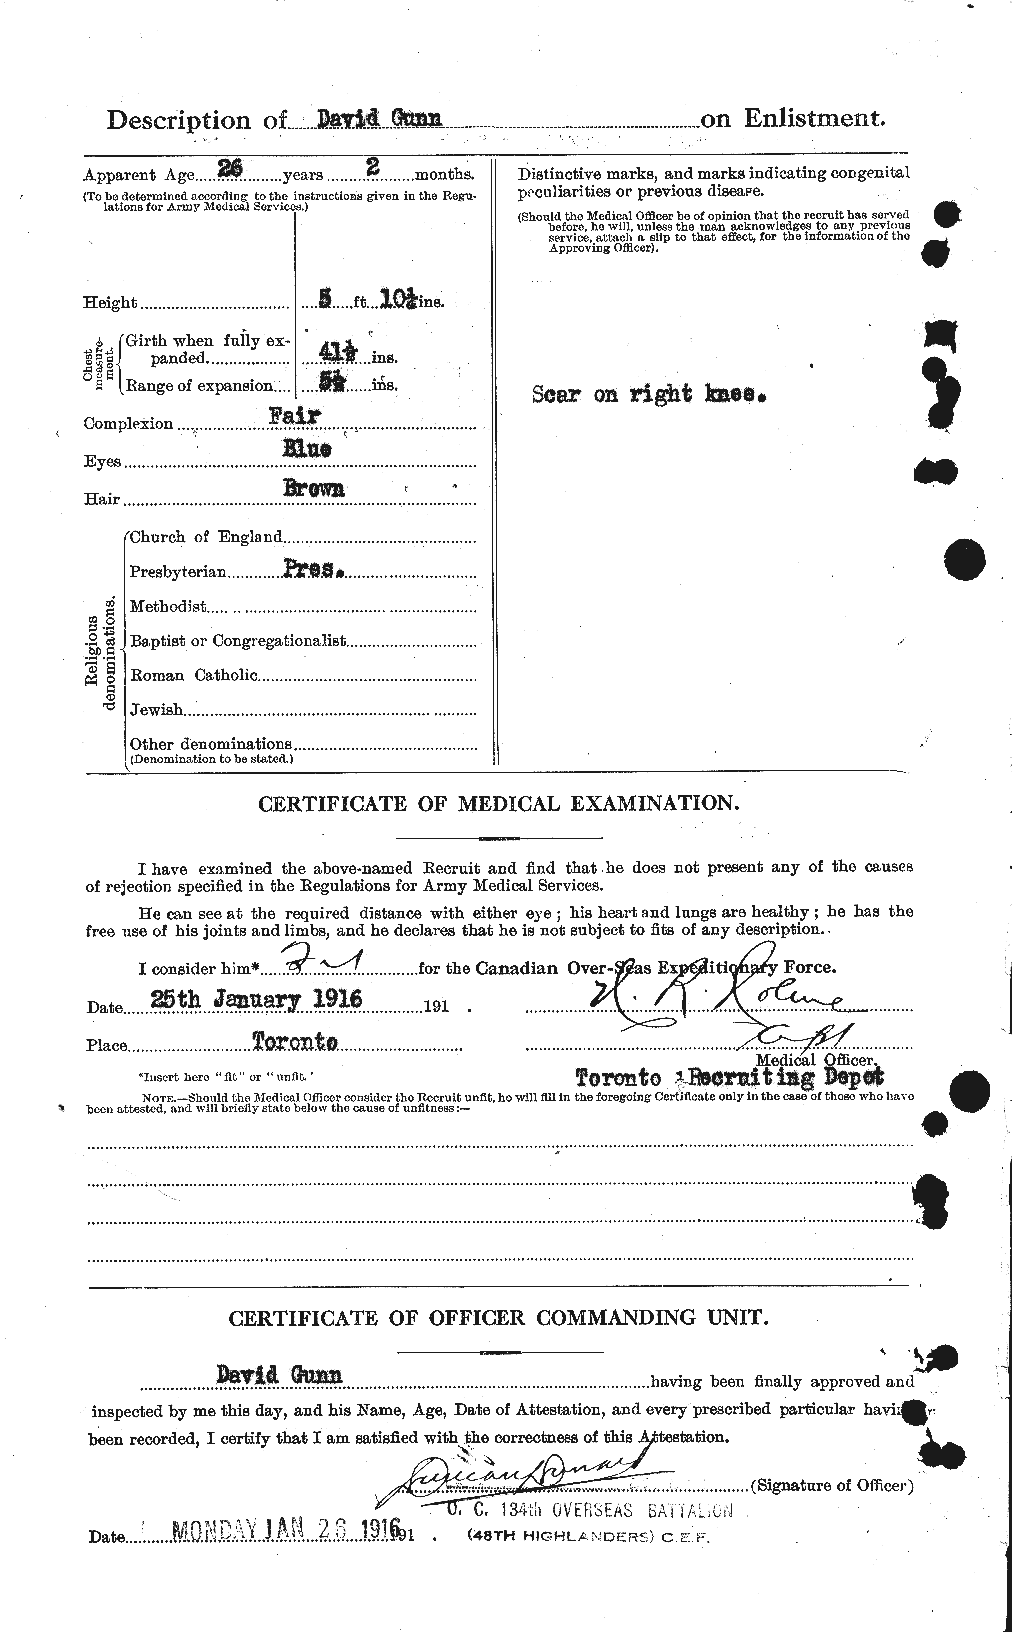 Personnel Records of the First World War - CEF 368021b